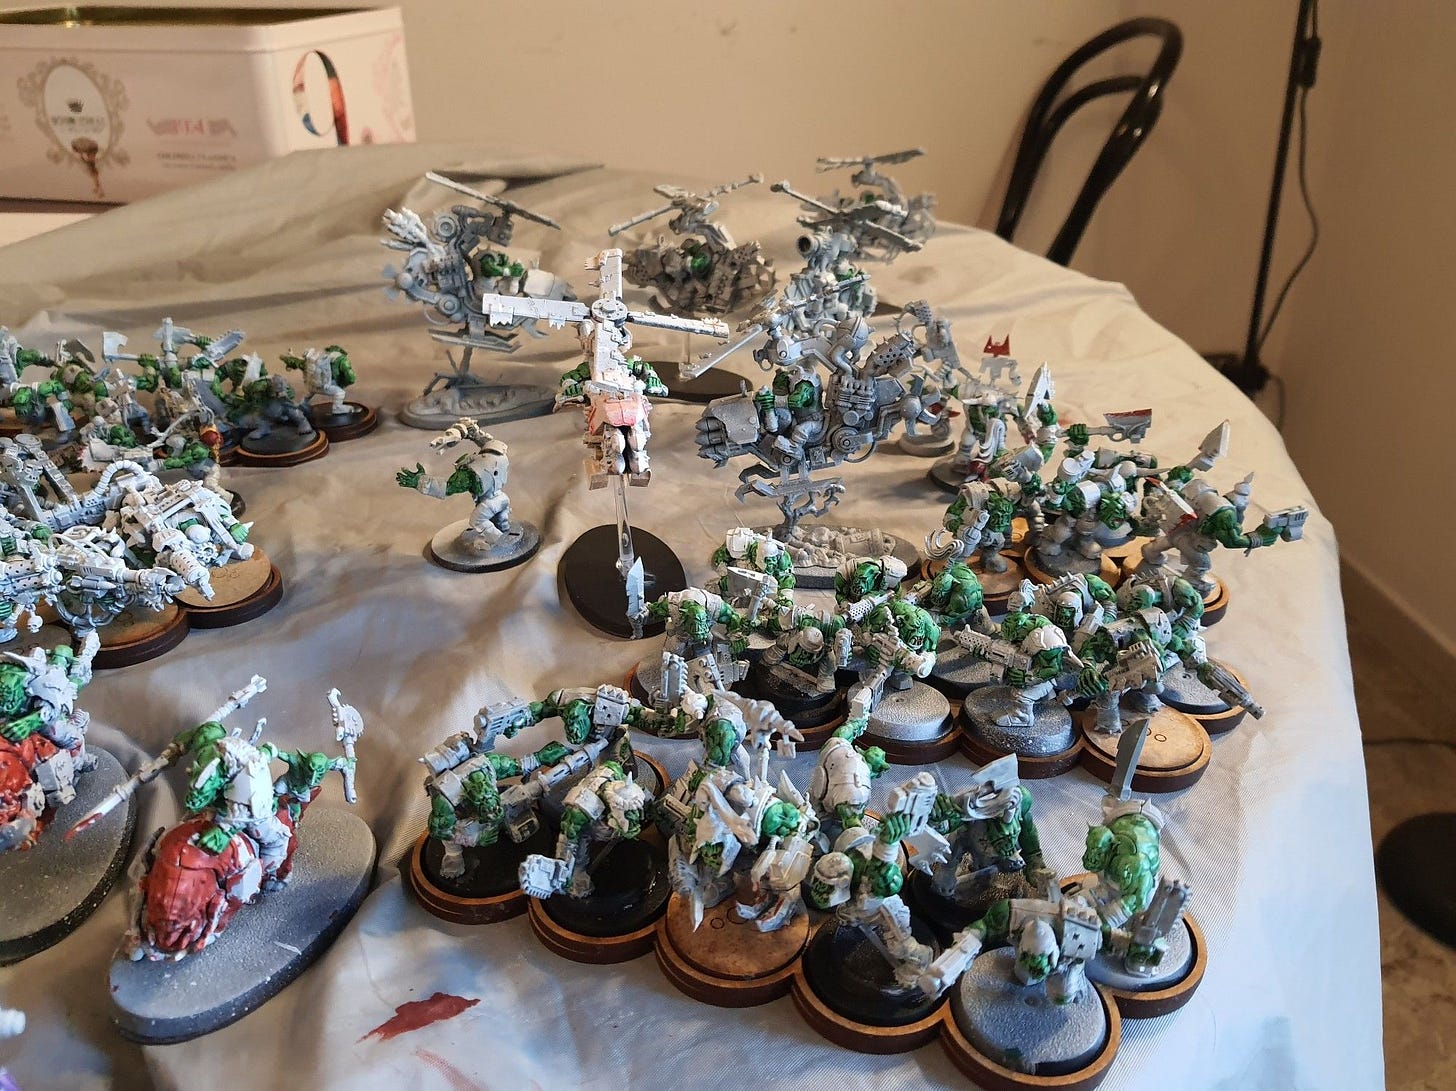 Some Orks, all primed in white and with their green skin painted with contrast paint. The picture shows three 10-Boyz squads, a kitbashed Weirdboy, six Deffkoptas, a kitbashed Warboss, some Lootas, and five Nobz with their ammo runt.